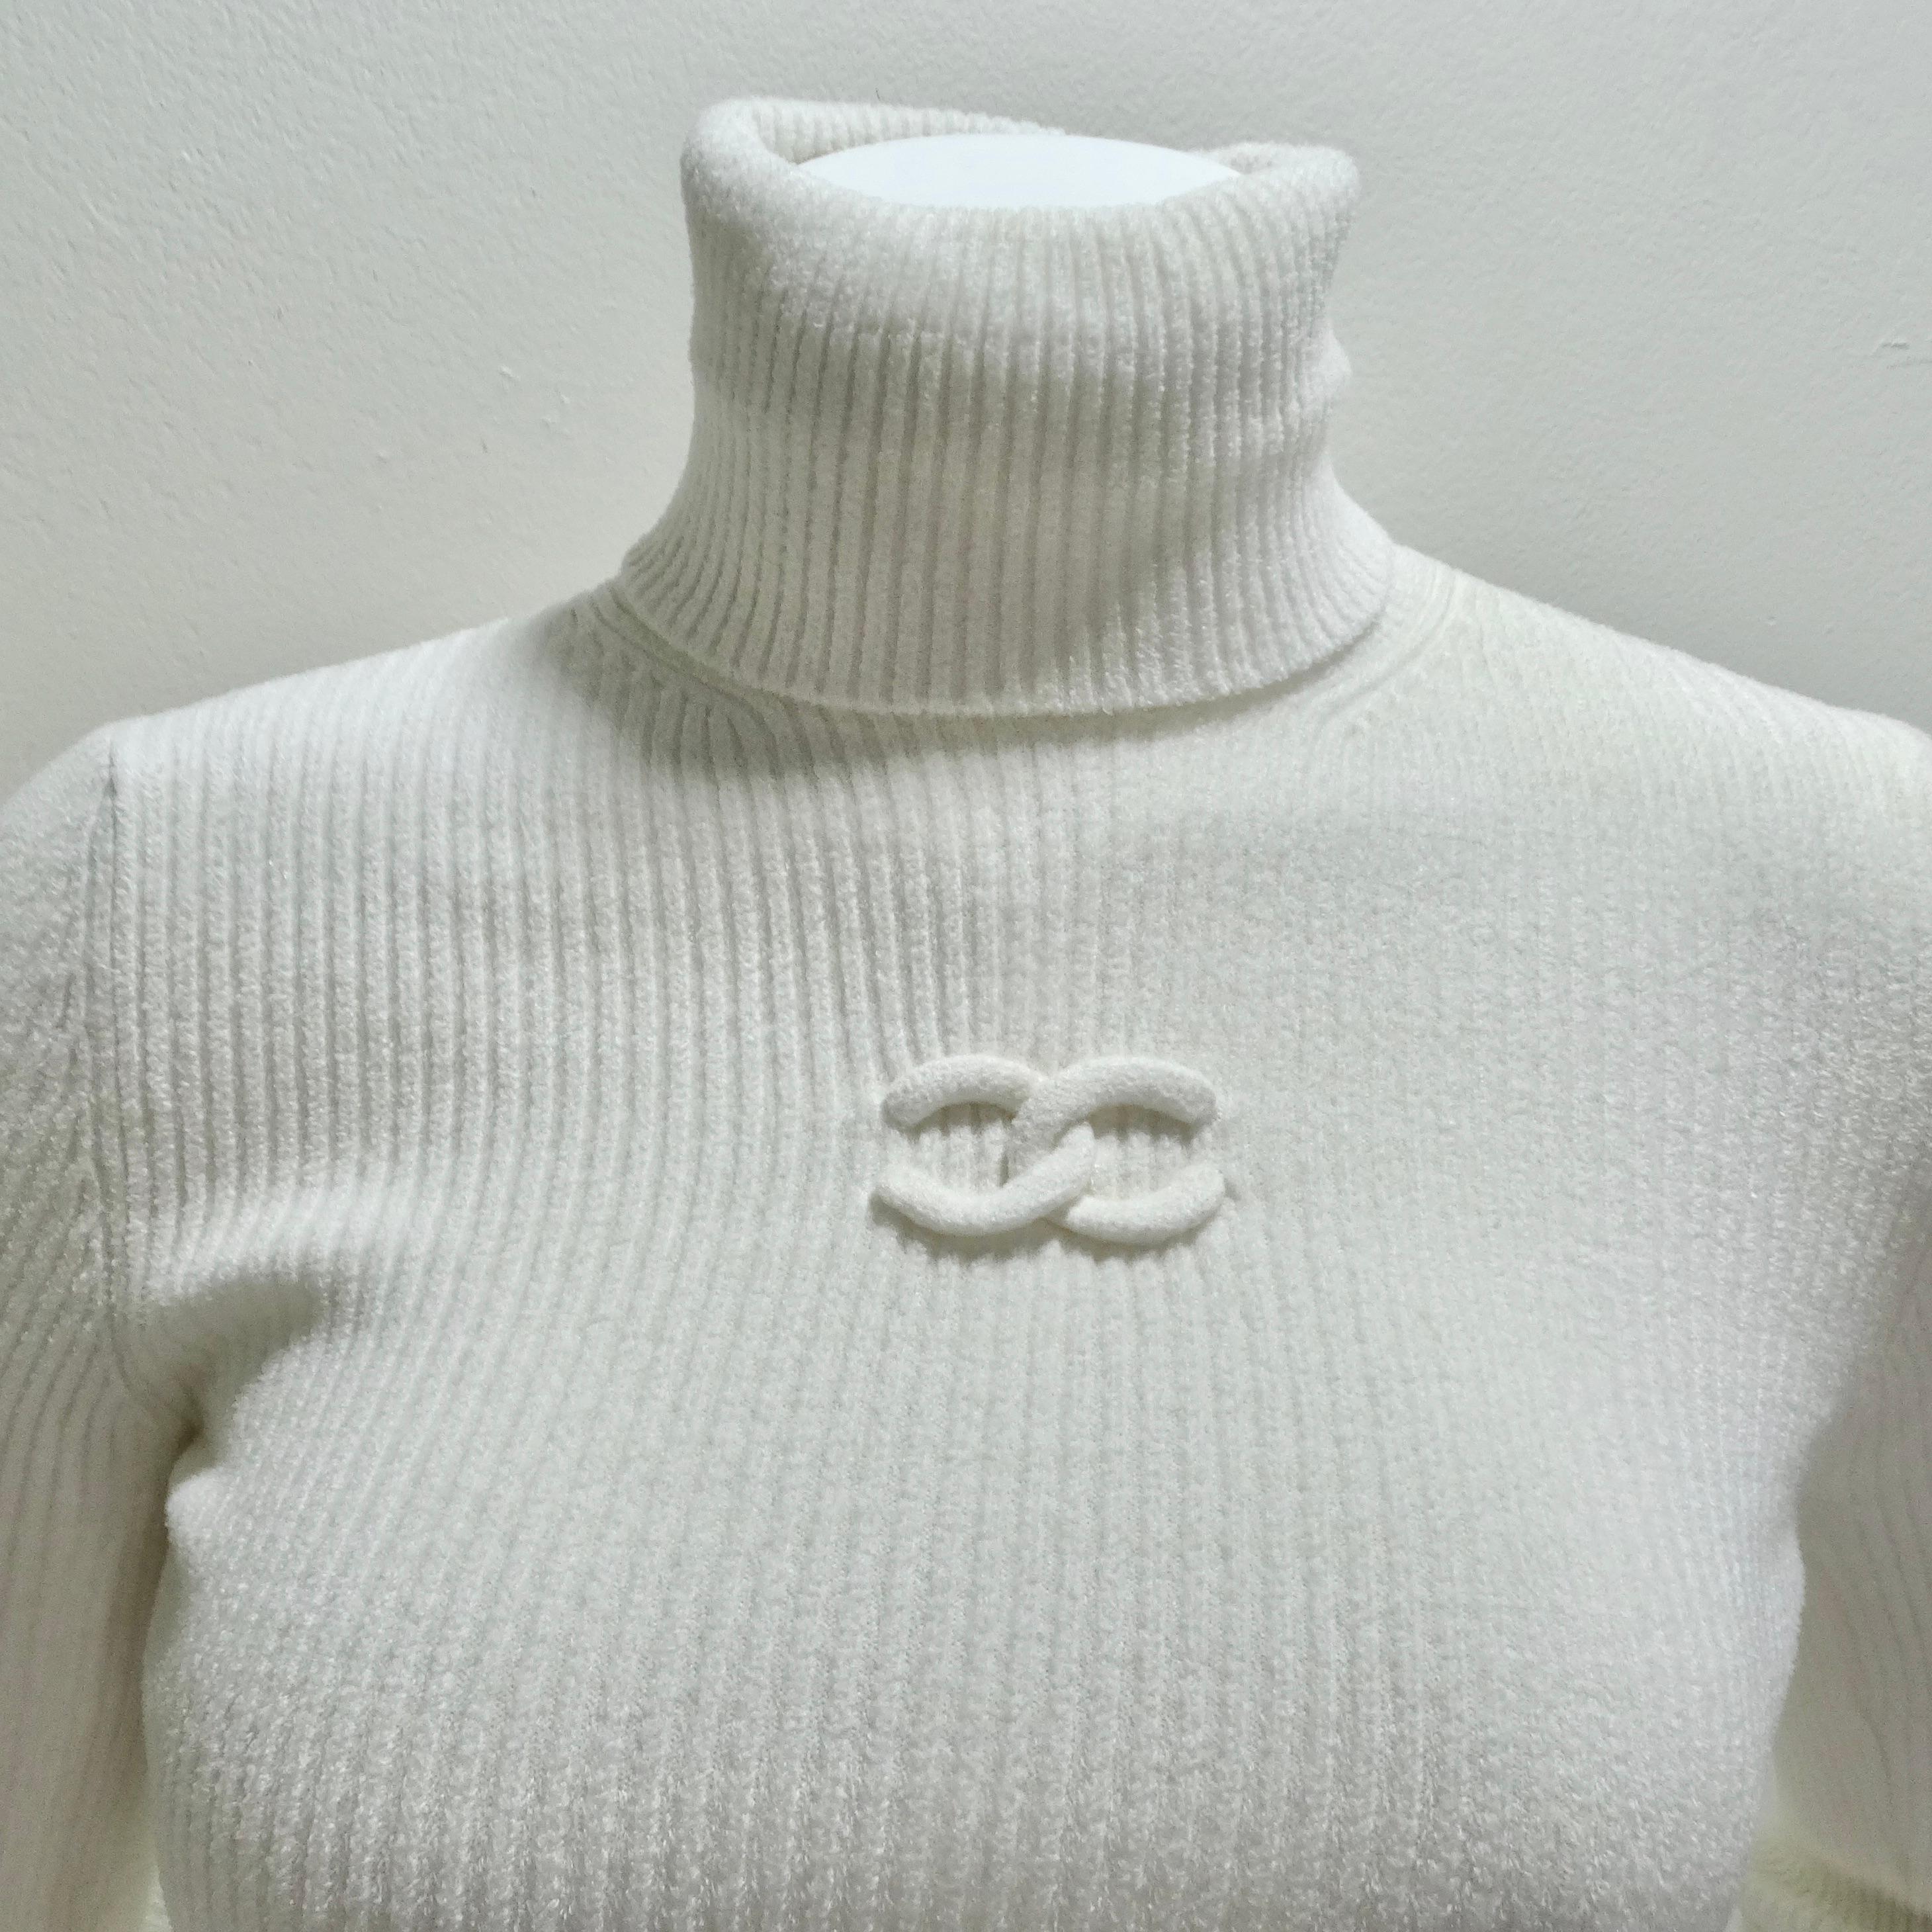 Introducing the epitome of timeless elegance - the Chanel CC Logo White Rib Knit Turtleneck. This classic, long-sleeve turtleneck is more than just a piece of clothing; it's a statement of refined luxury. Crafted from a sumptuously stretchy and soft